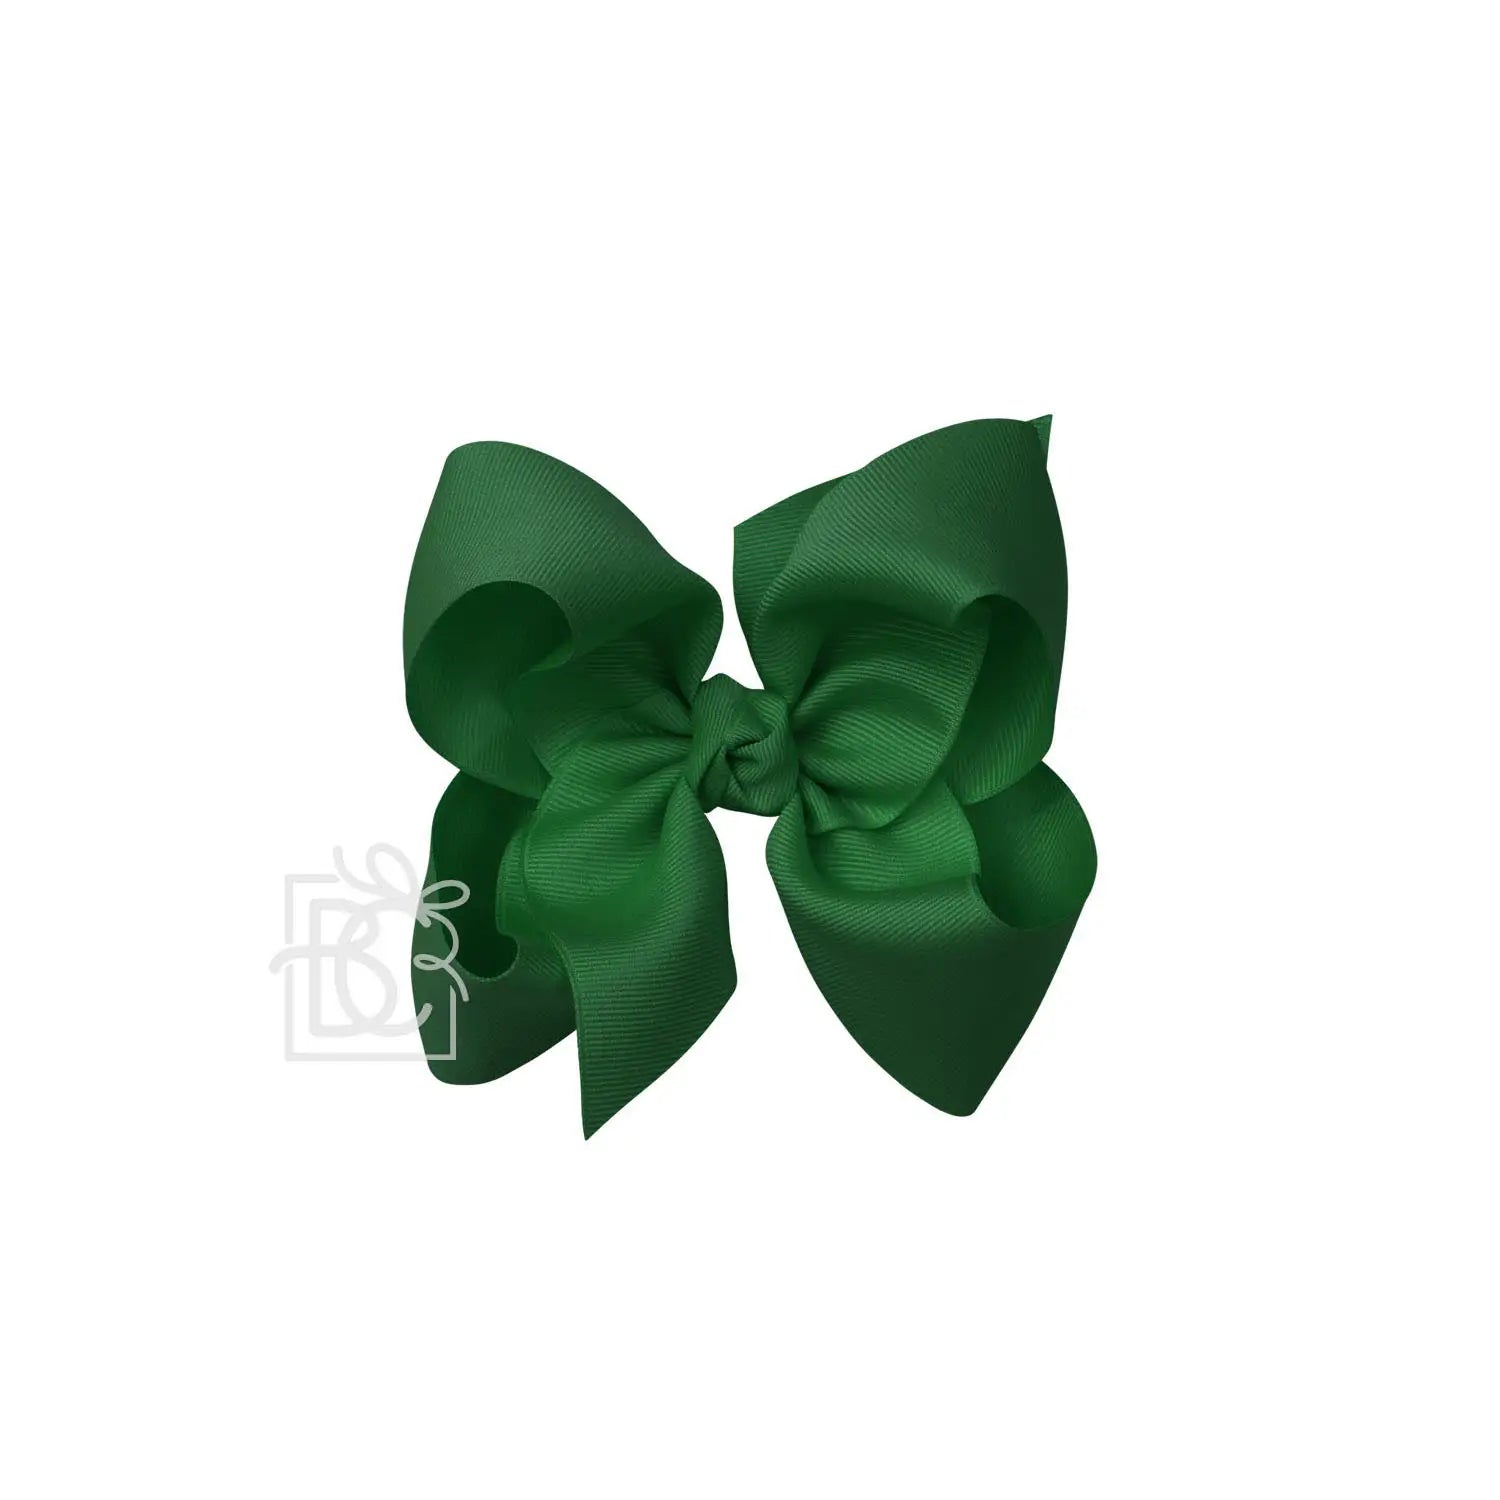 Signature Bow on Alligator Clip - Forest Green